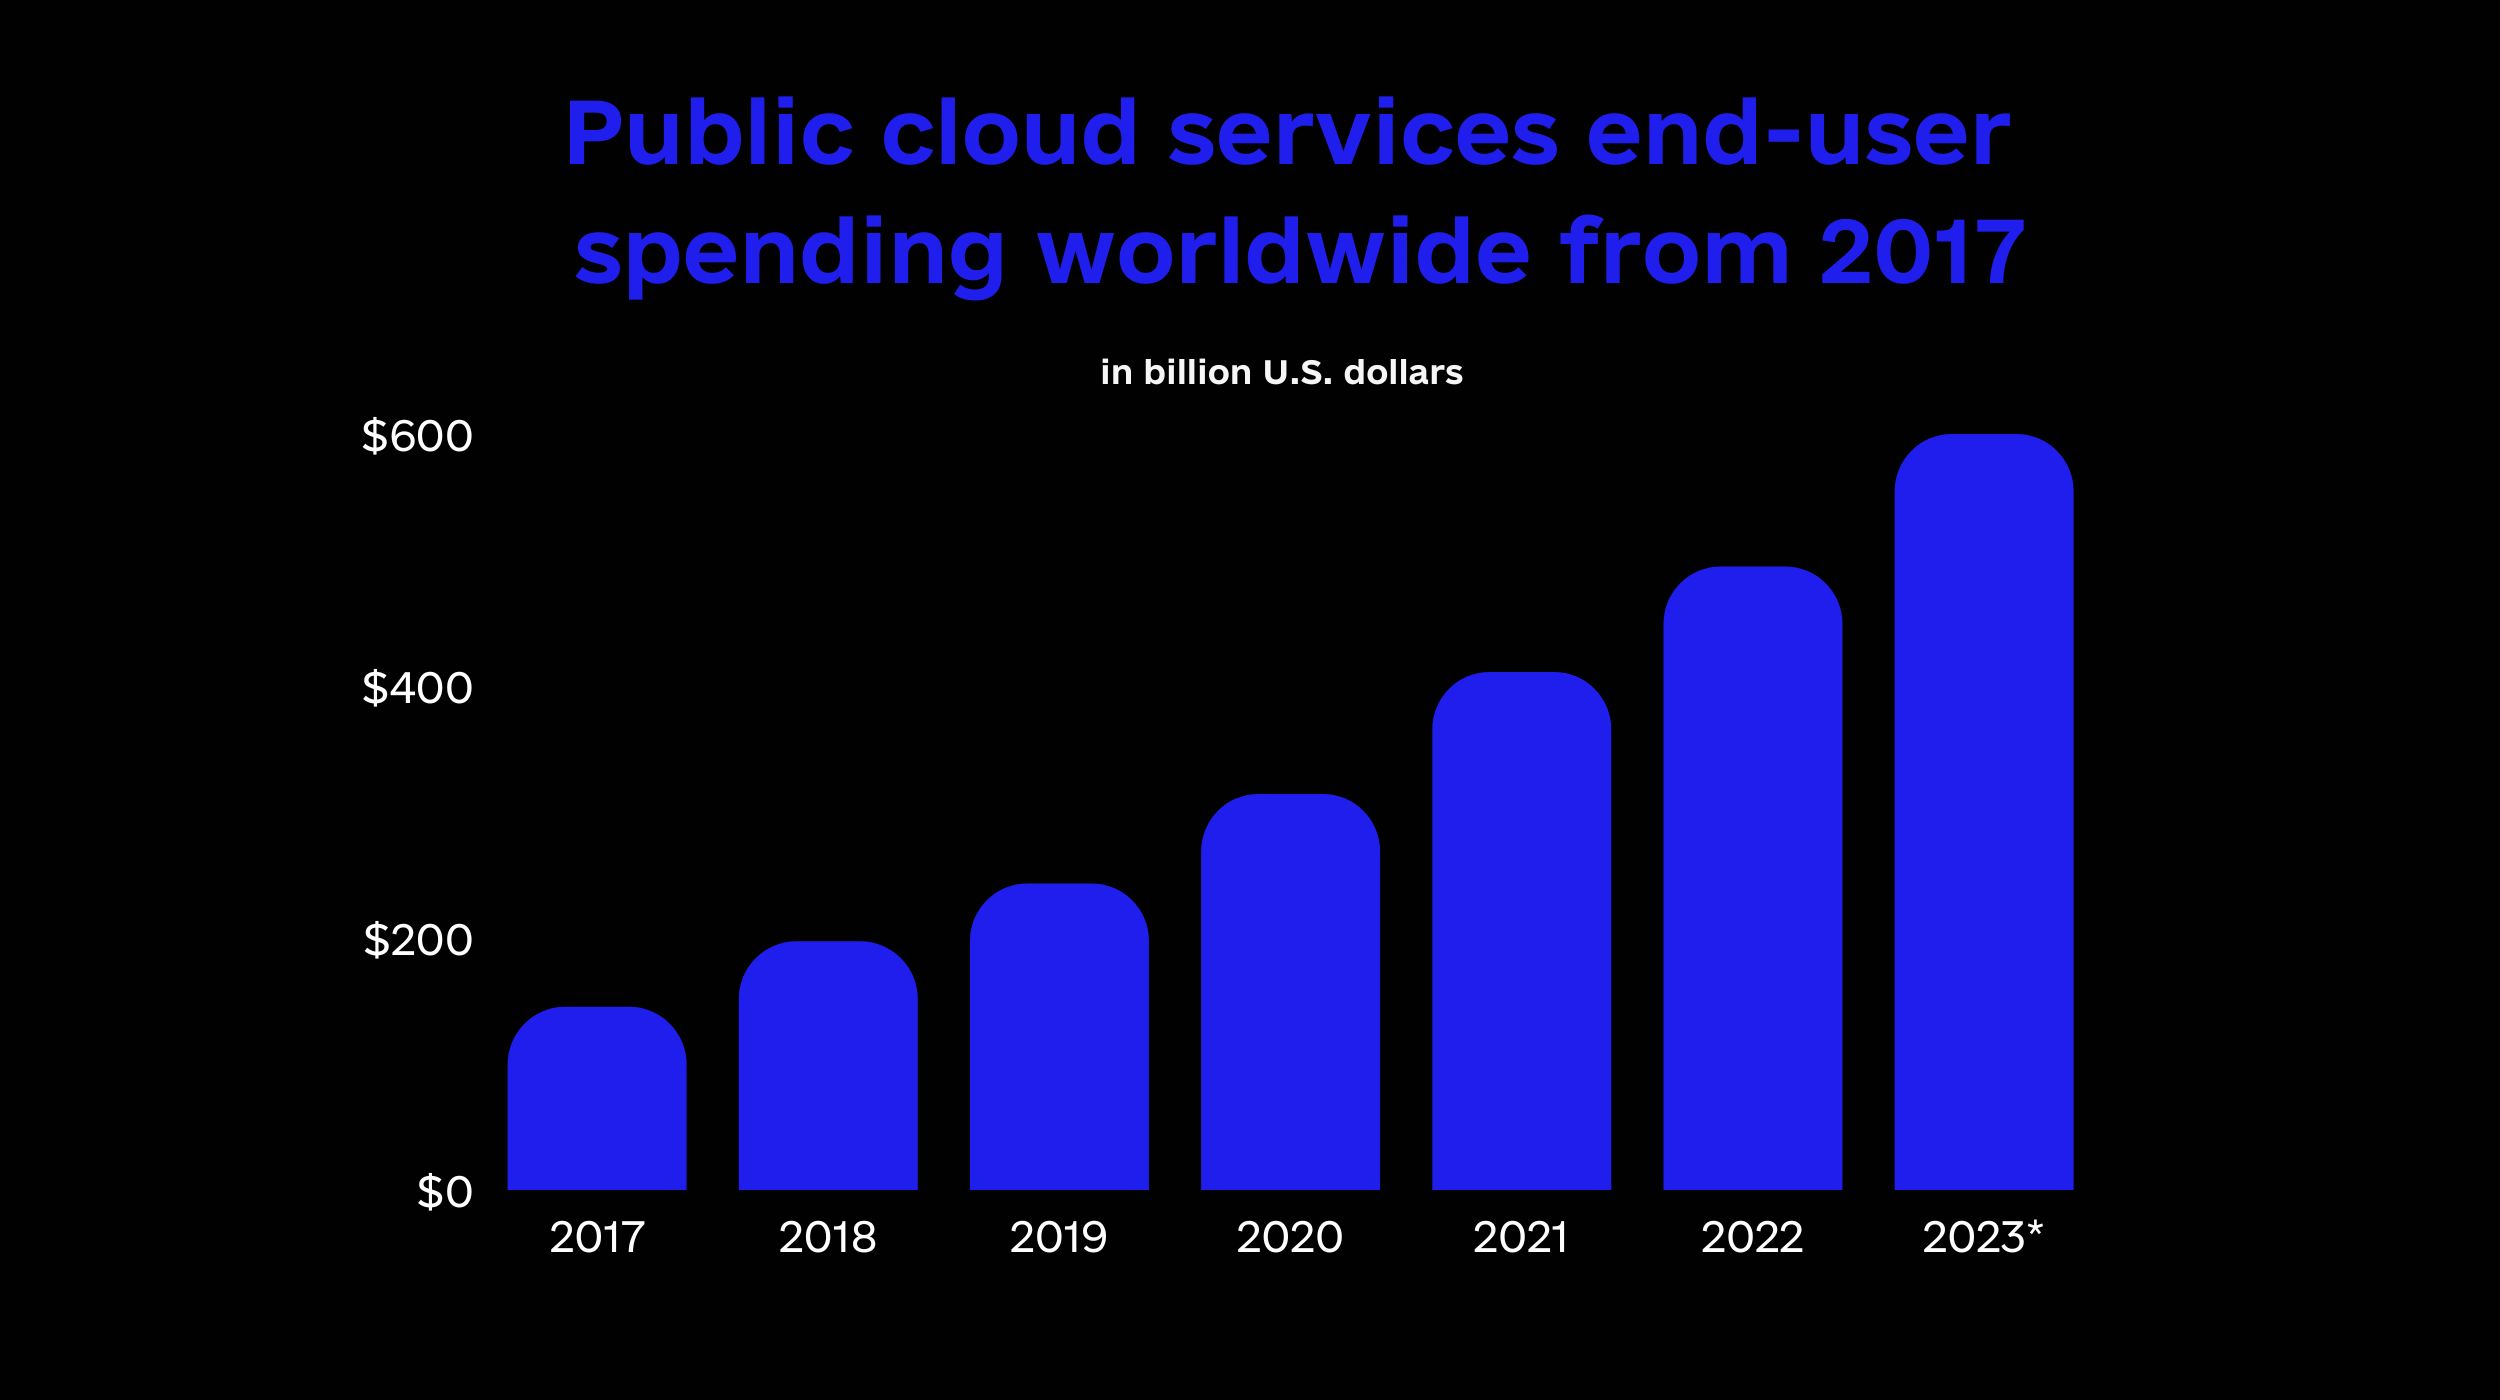 Public cloud services end-user spending worldwide from 2017